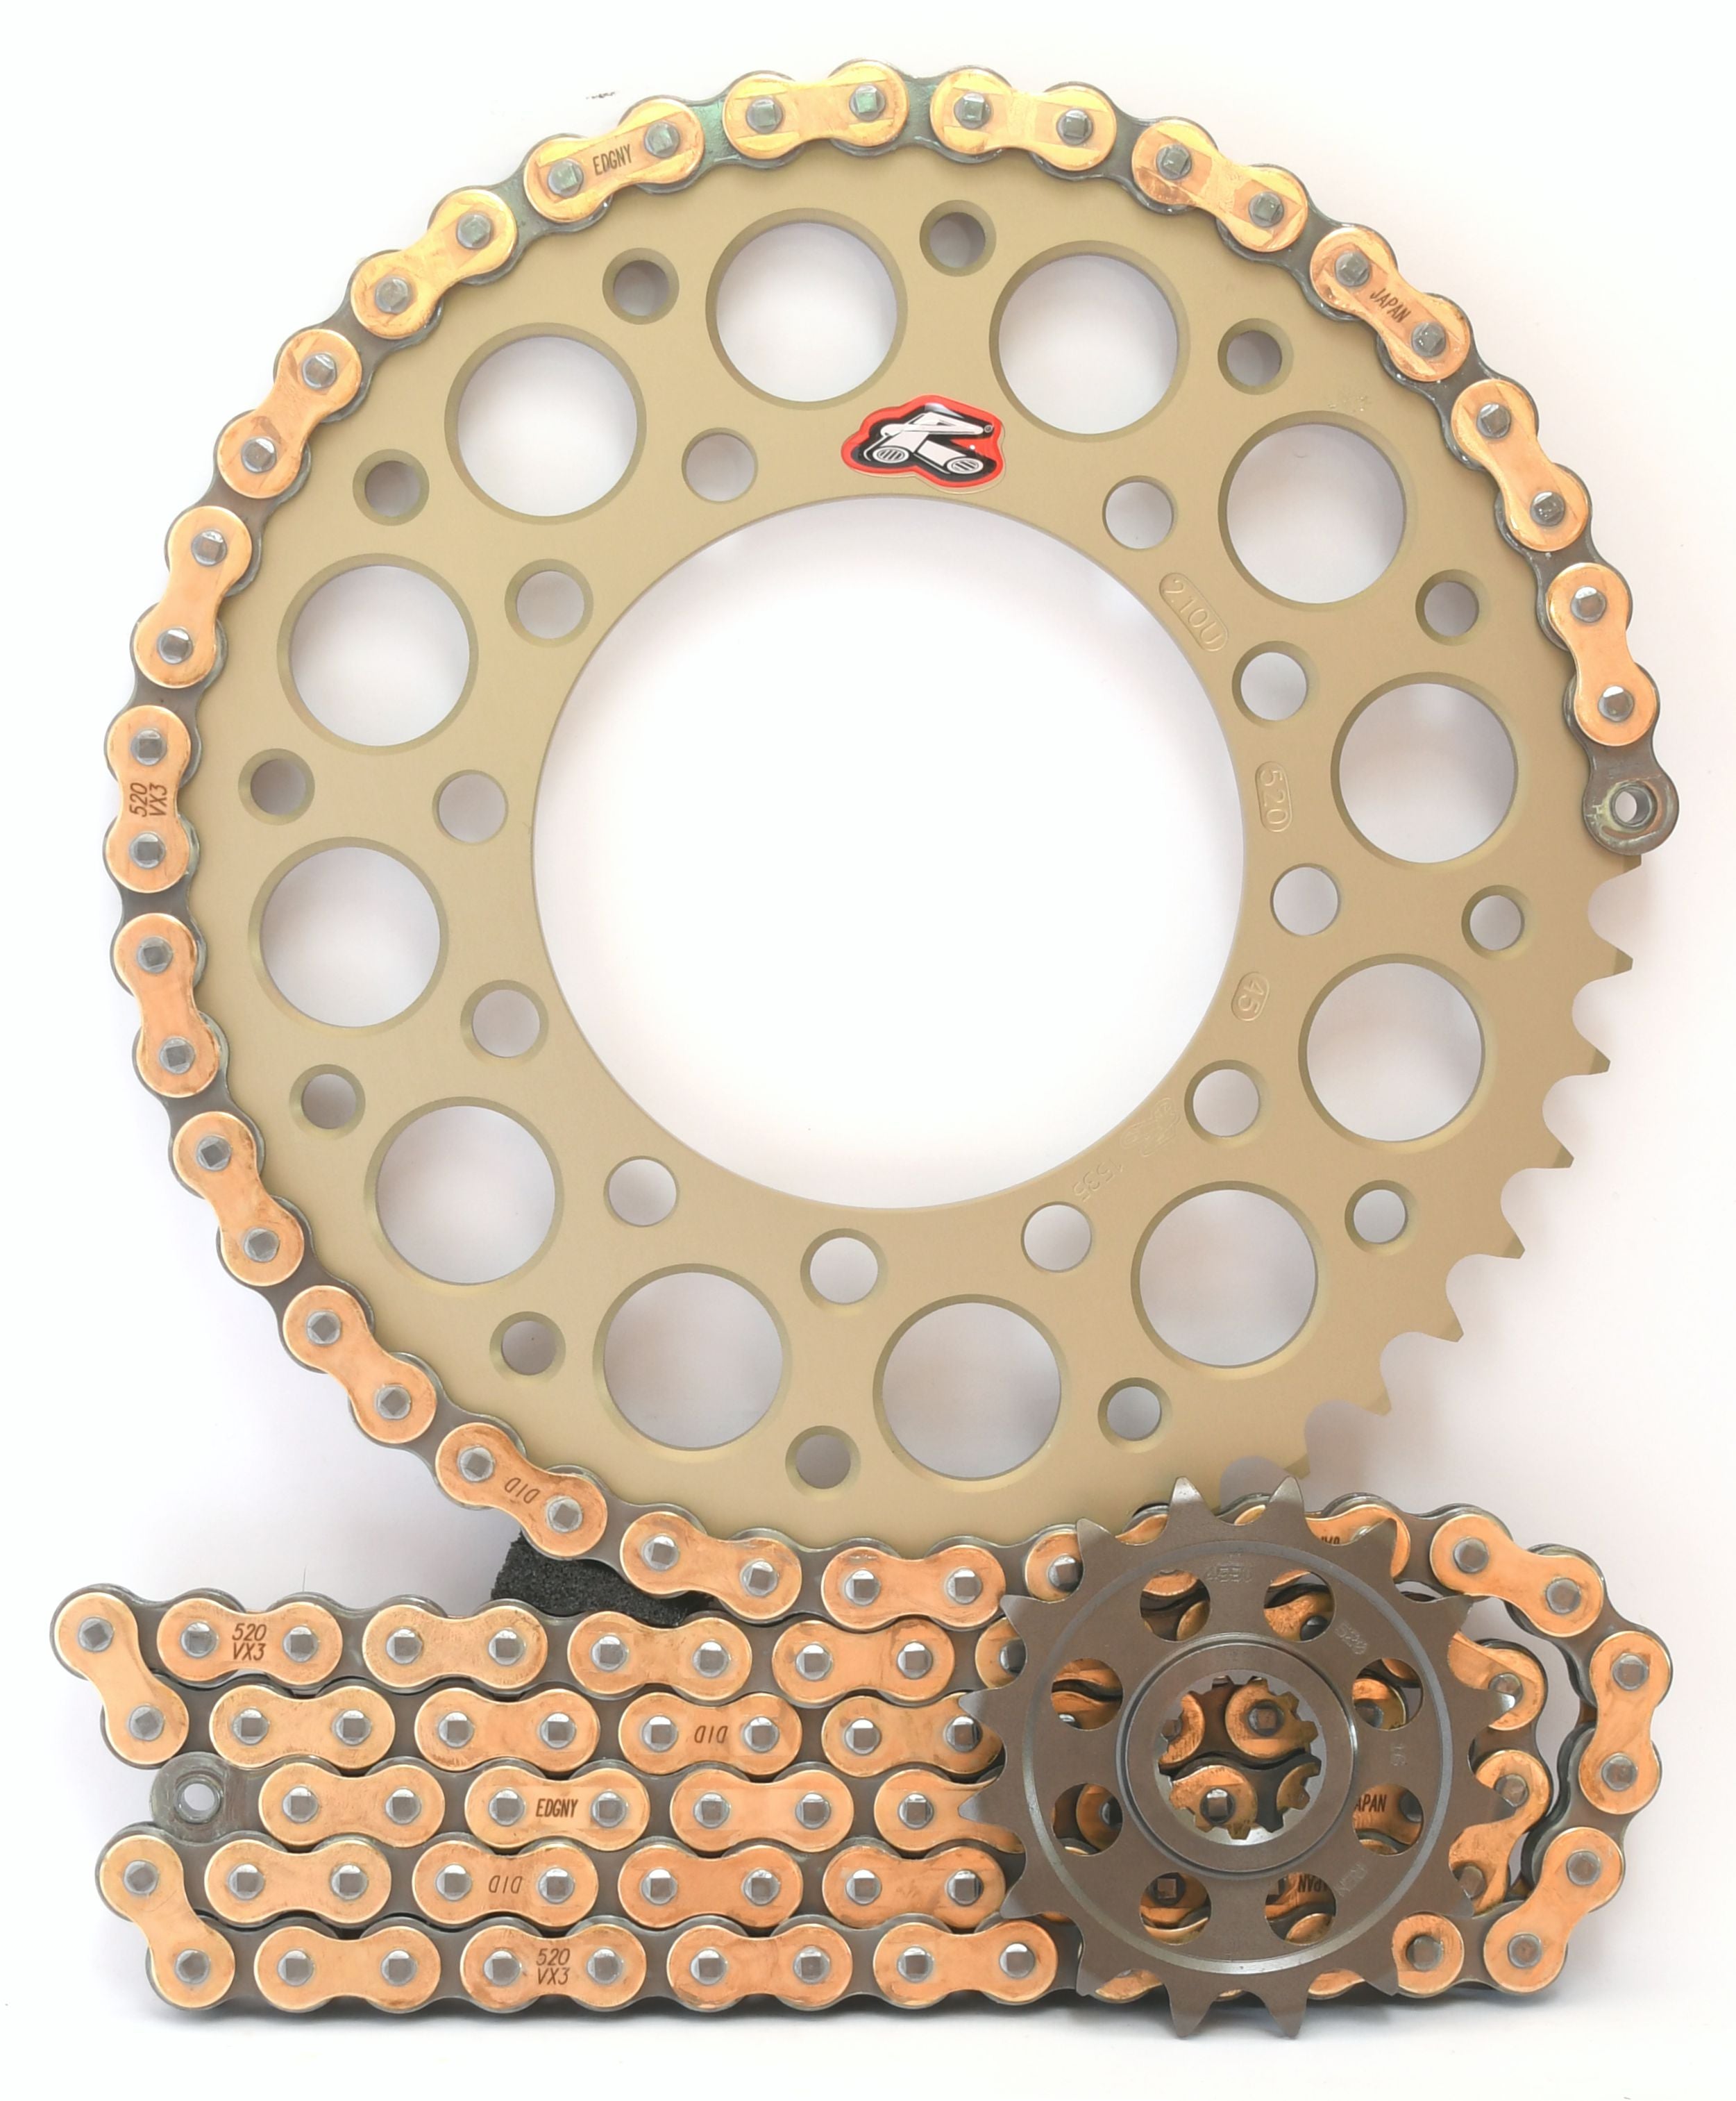 Renthal Ultralight and DID 520 Conversion Chain & Sprocket Kit for Yamaha R1 2015> - Standard Gearing